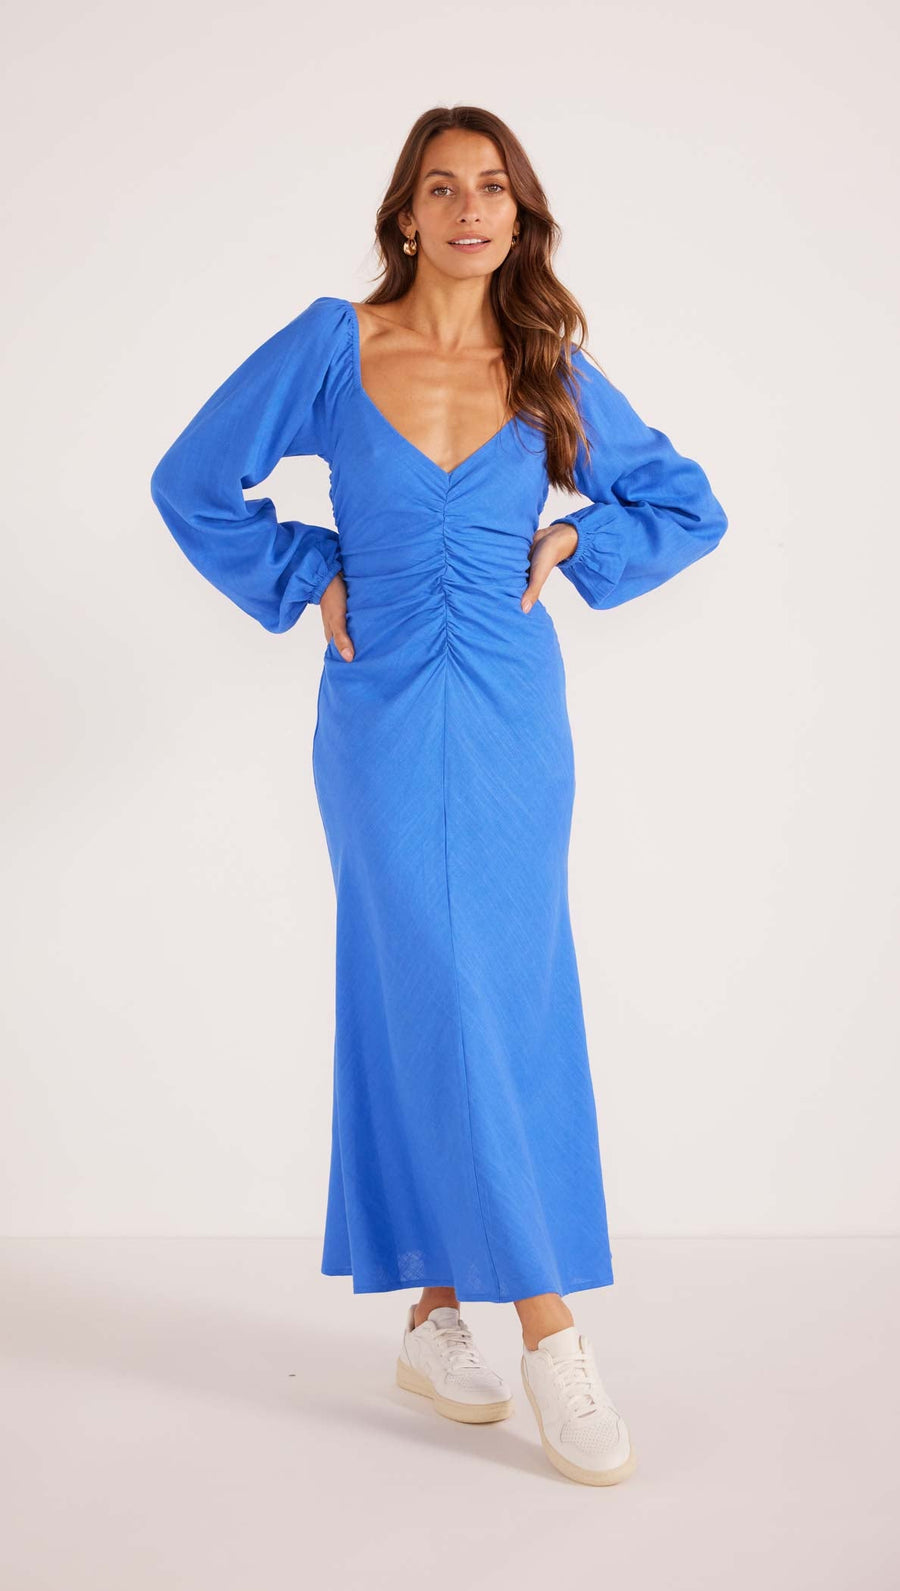 Minkpink - Phoebe Ruched Midi Dress in Saphire